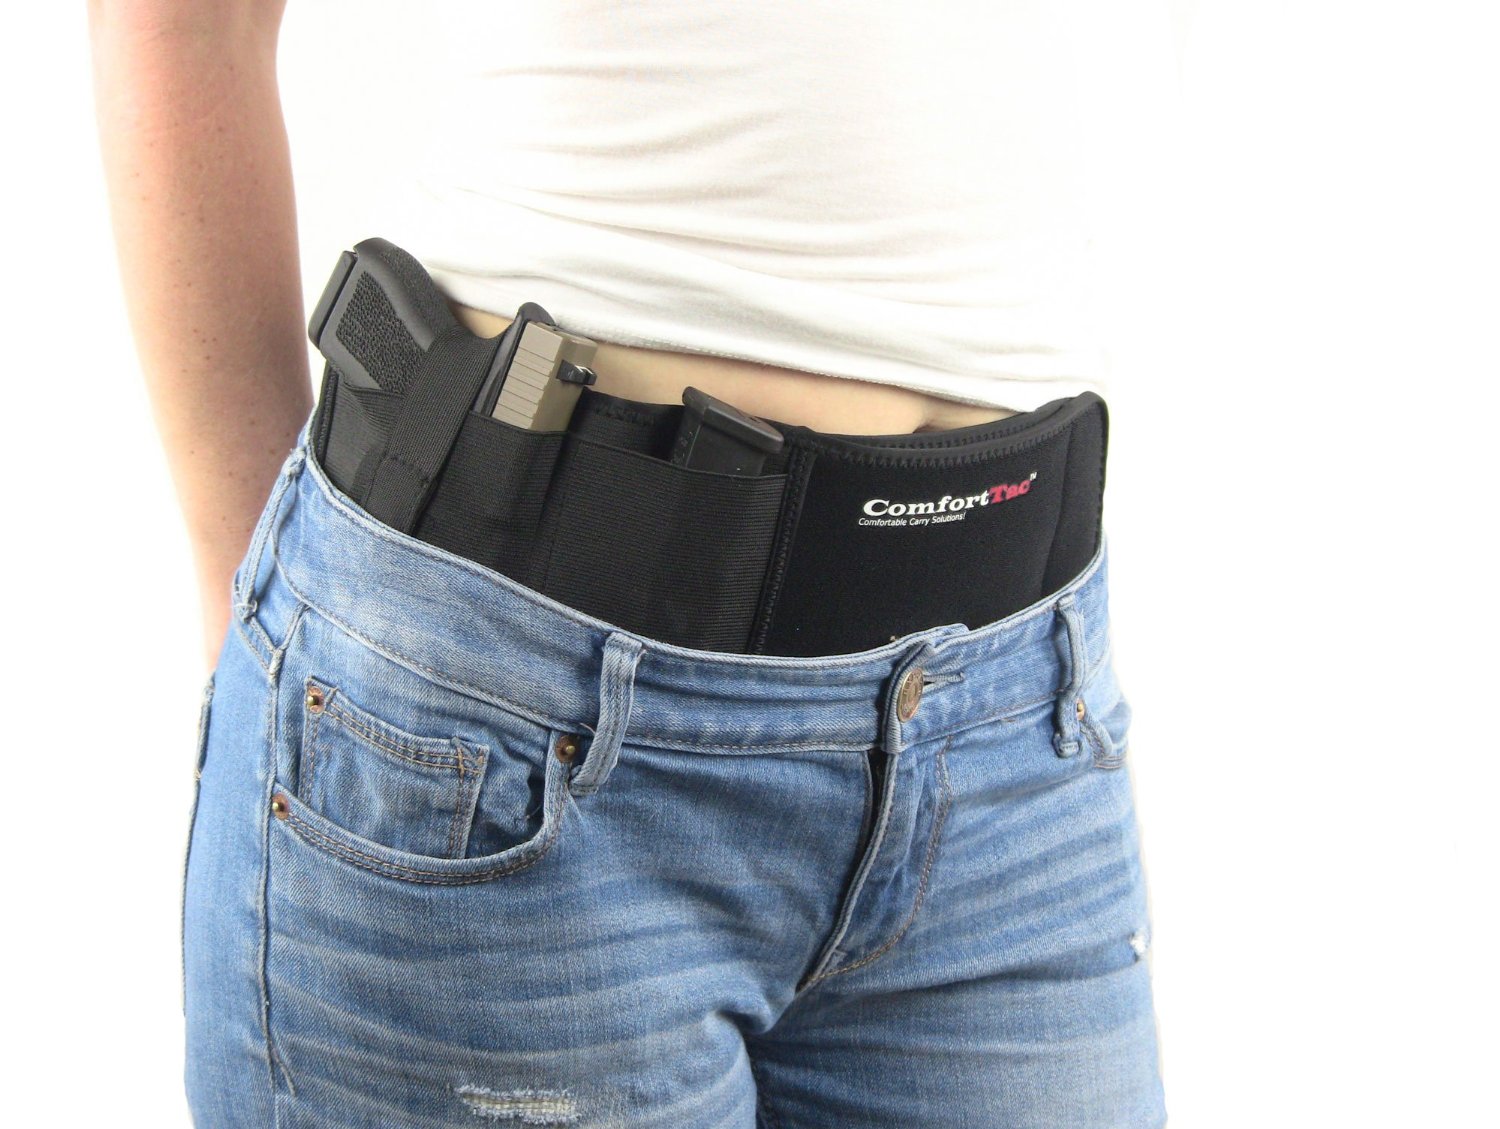 best belly band holster reviews